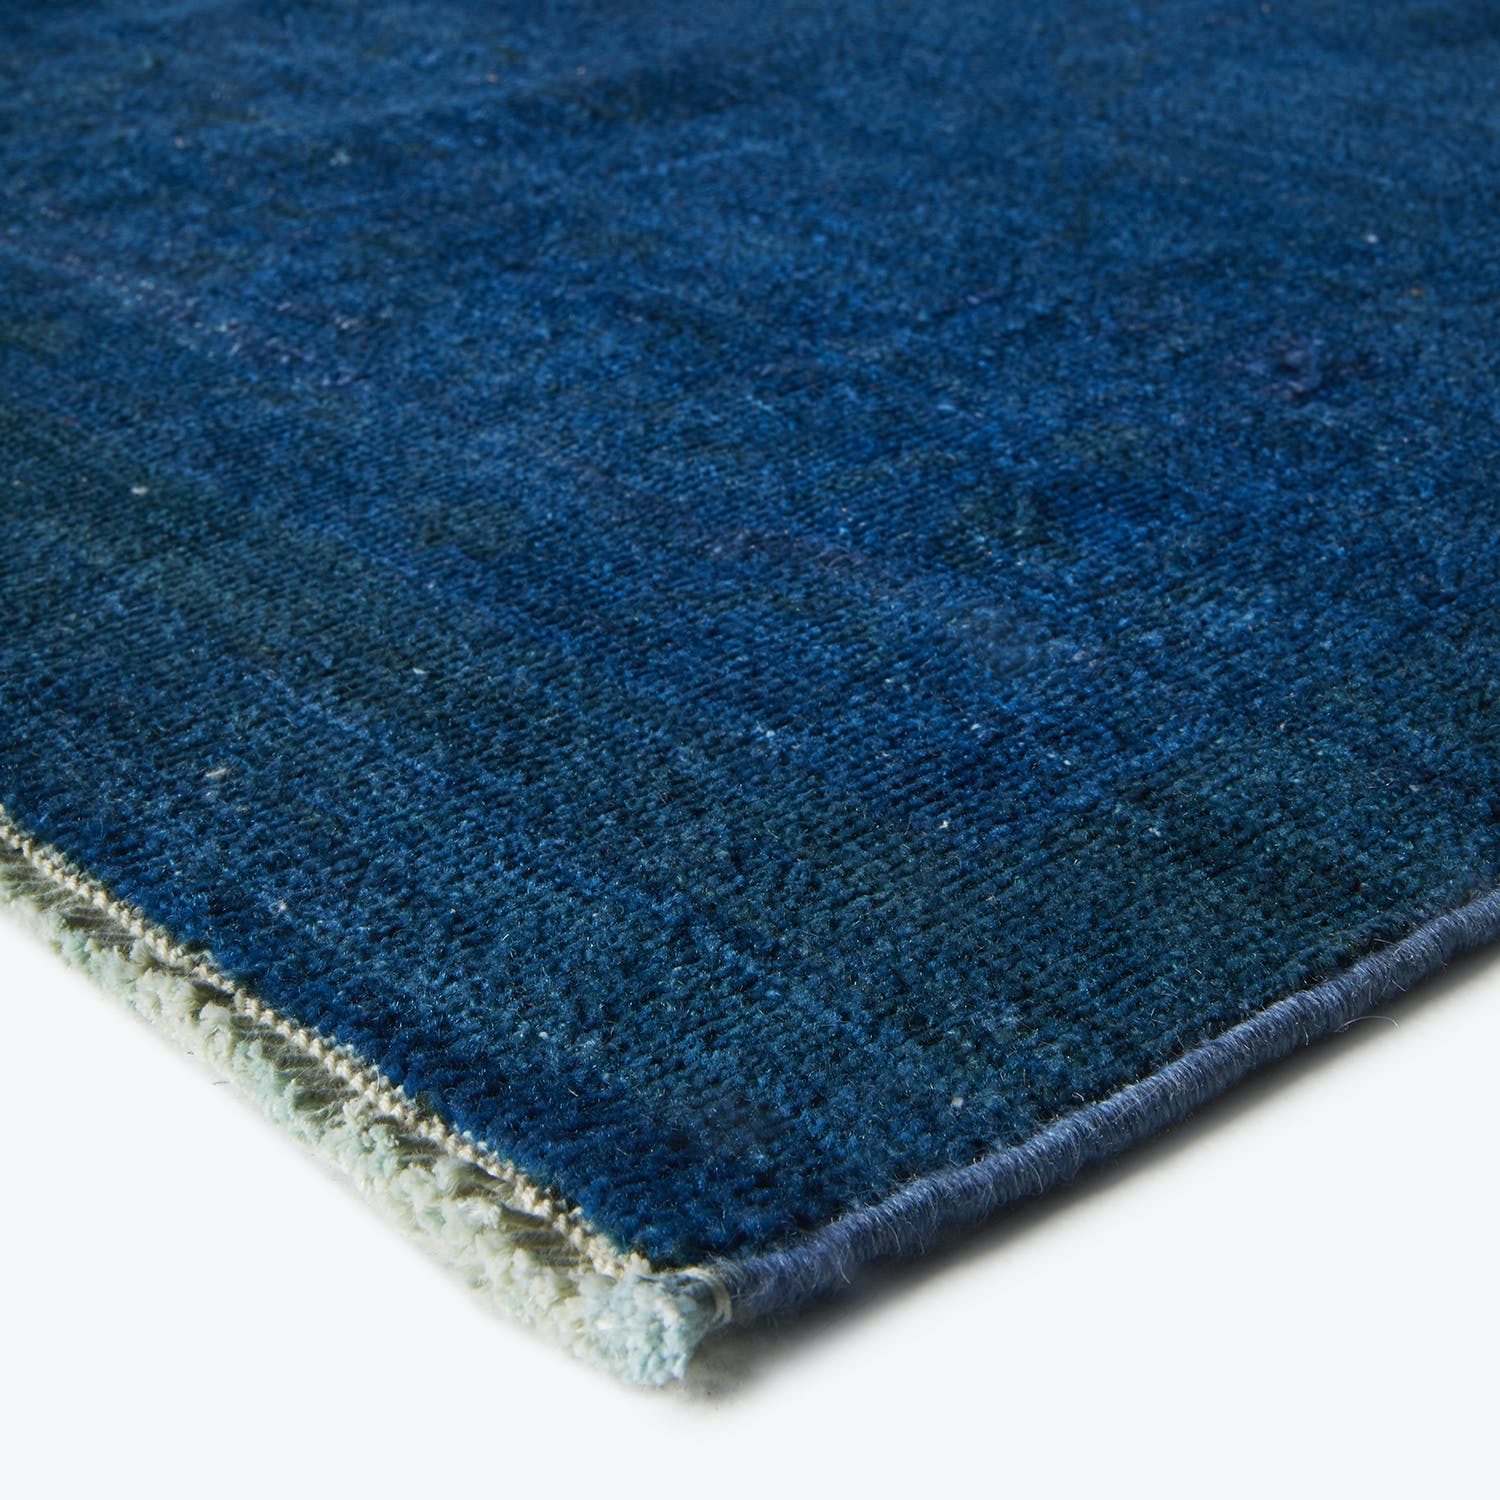 Close-up of a high-quality deep blue rug with looped texture.